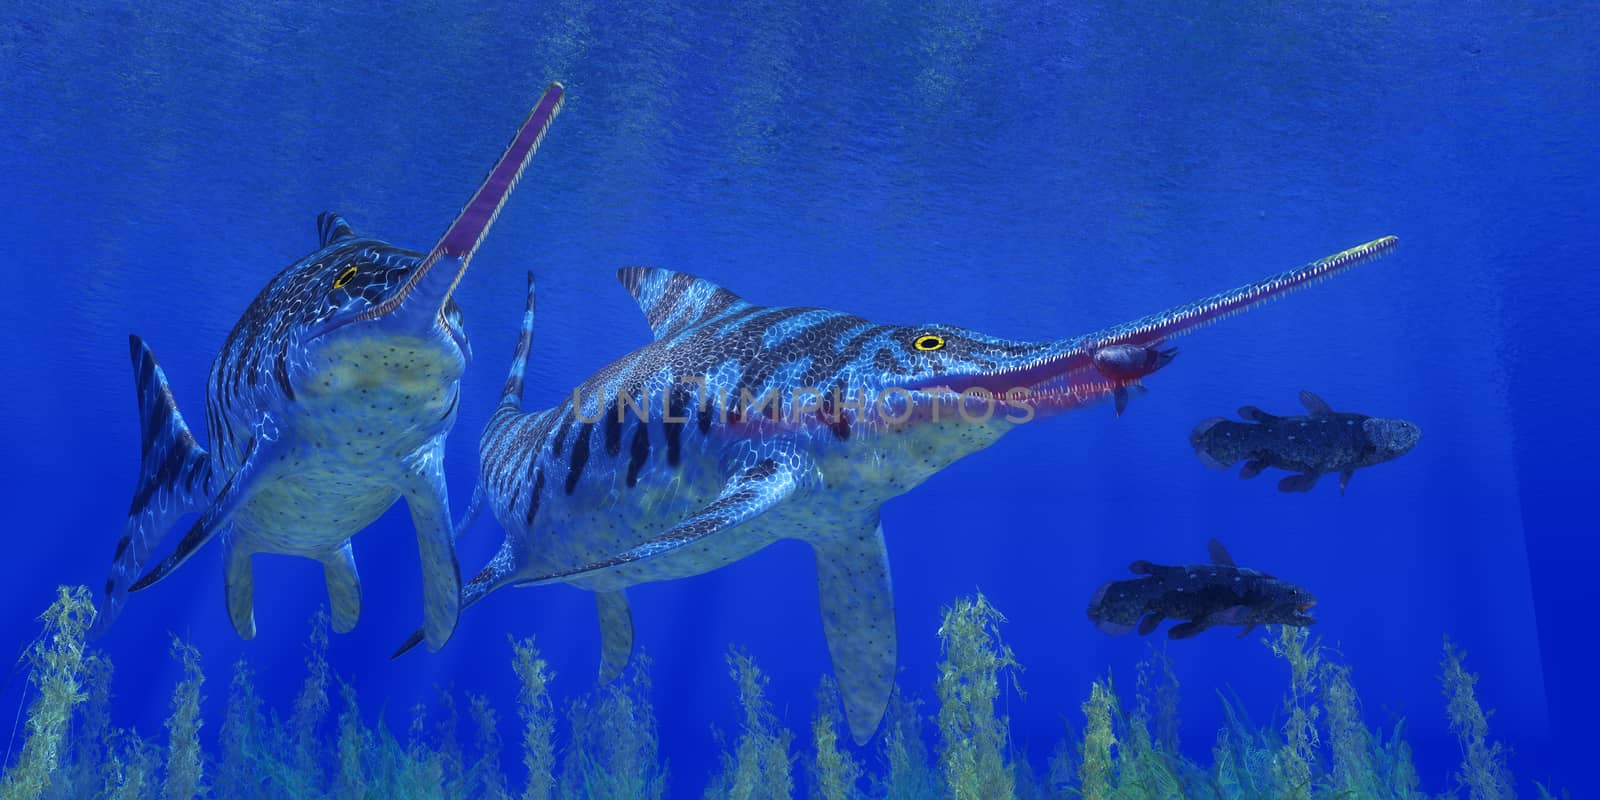 A Coelacanth fish becomes prey for a Eurhinosaurus marine reptile in a Jurassic ocean.